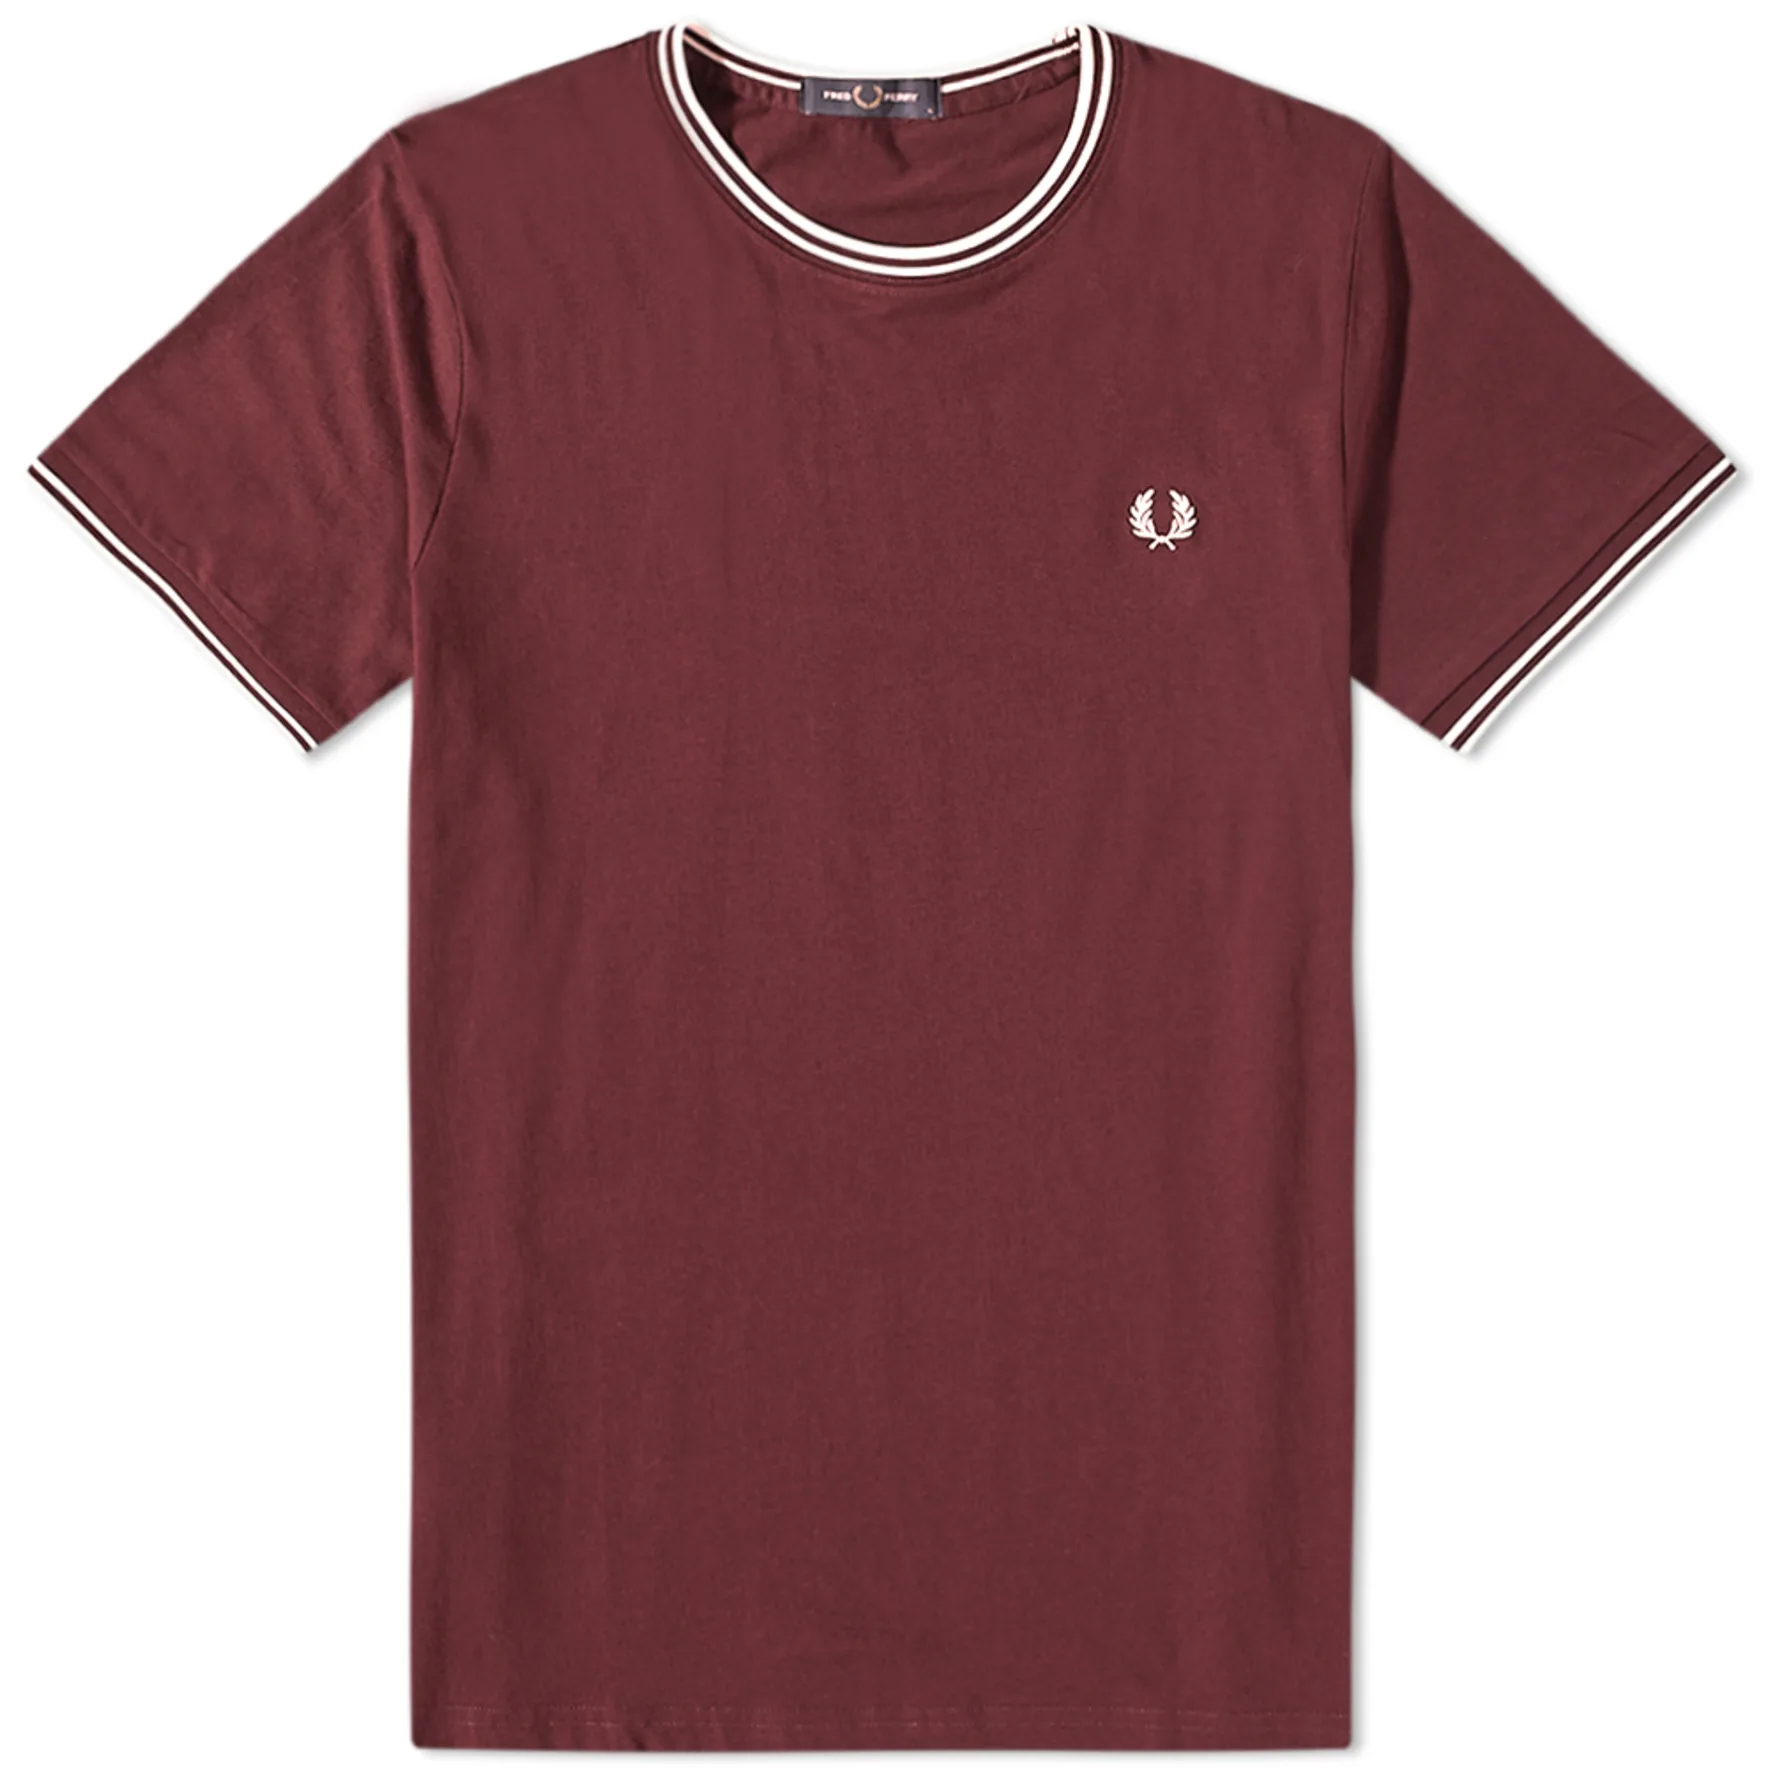 Футболка Fred Perry Authentic Twin Tipped, бордовый